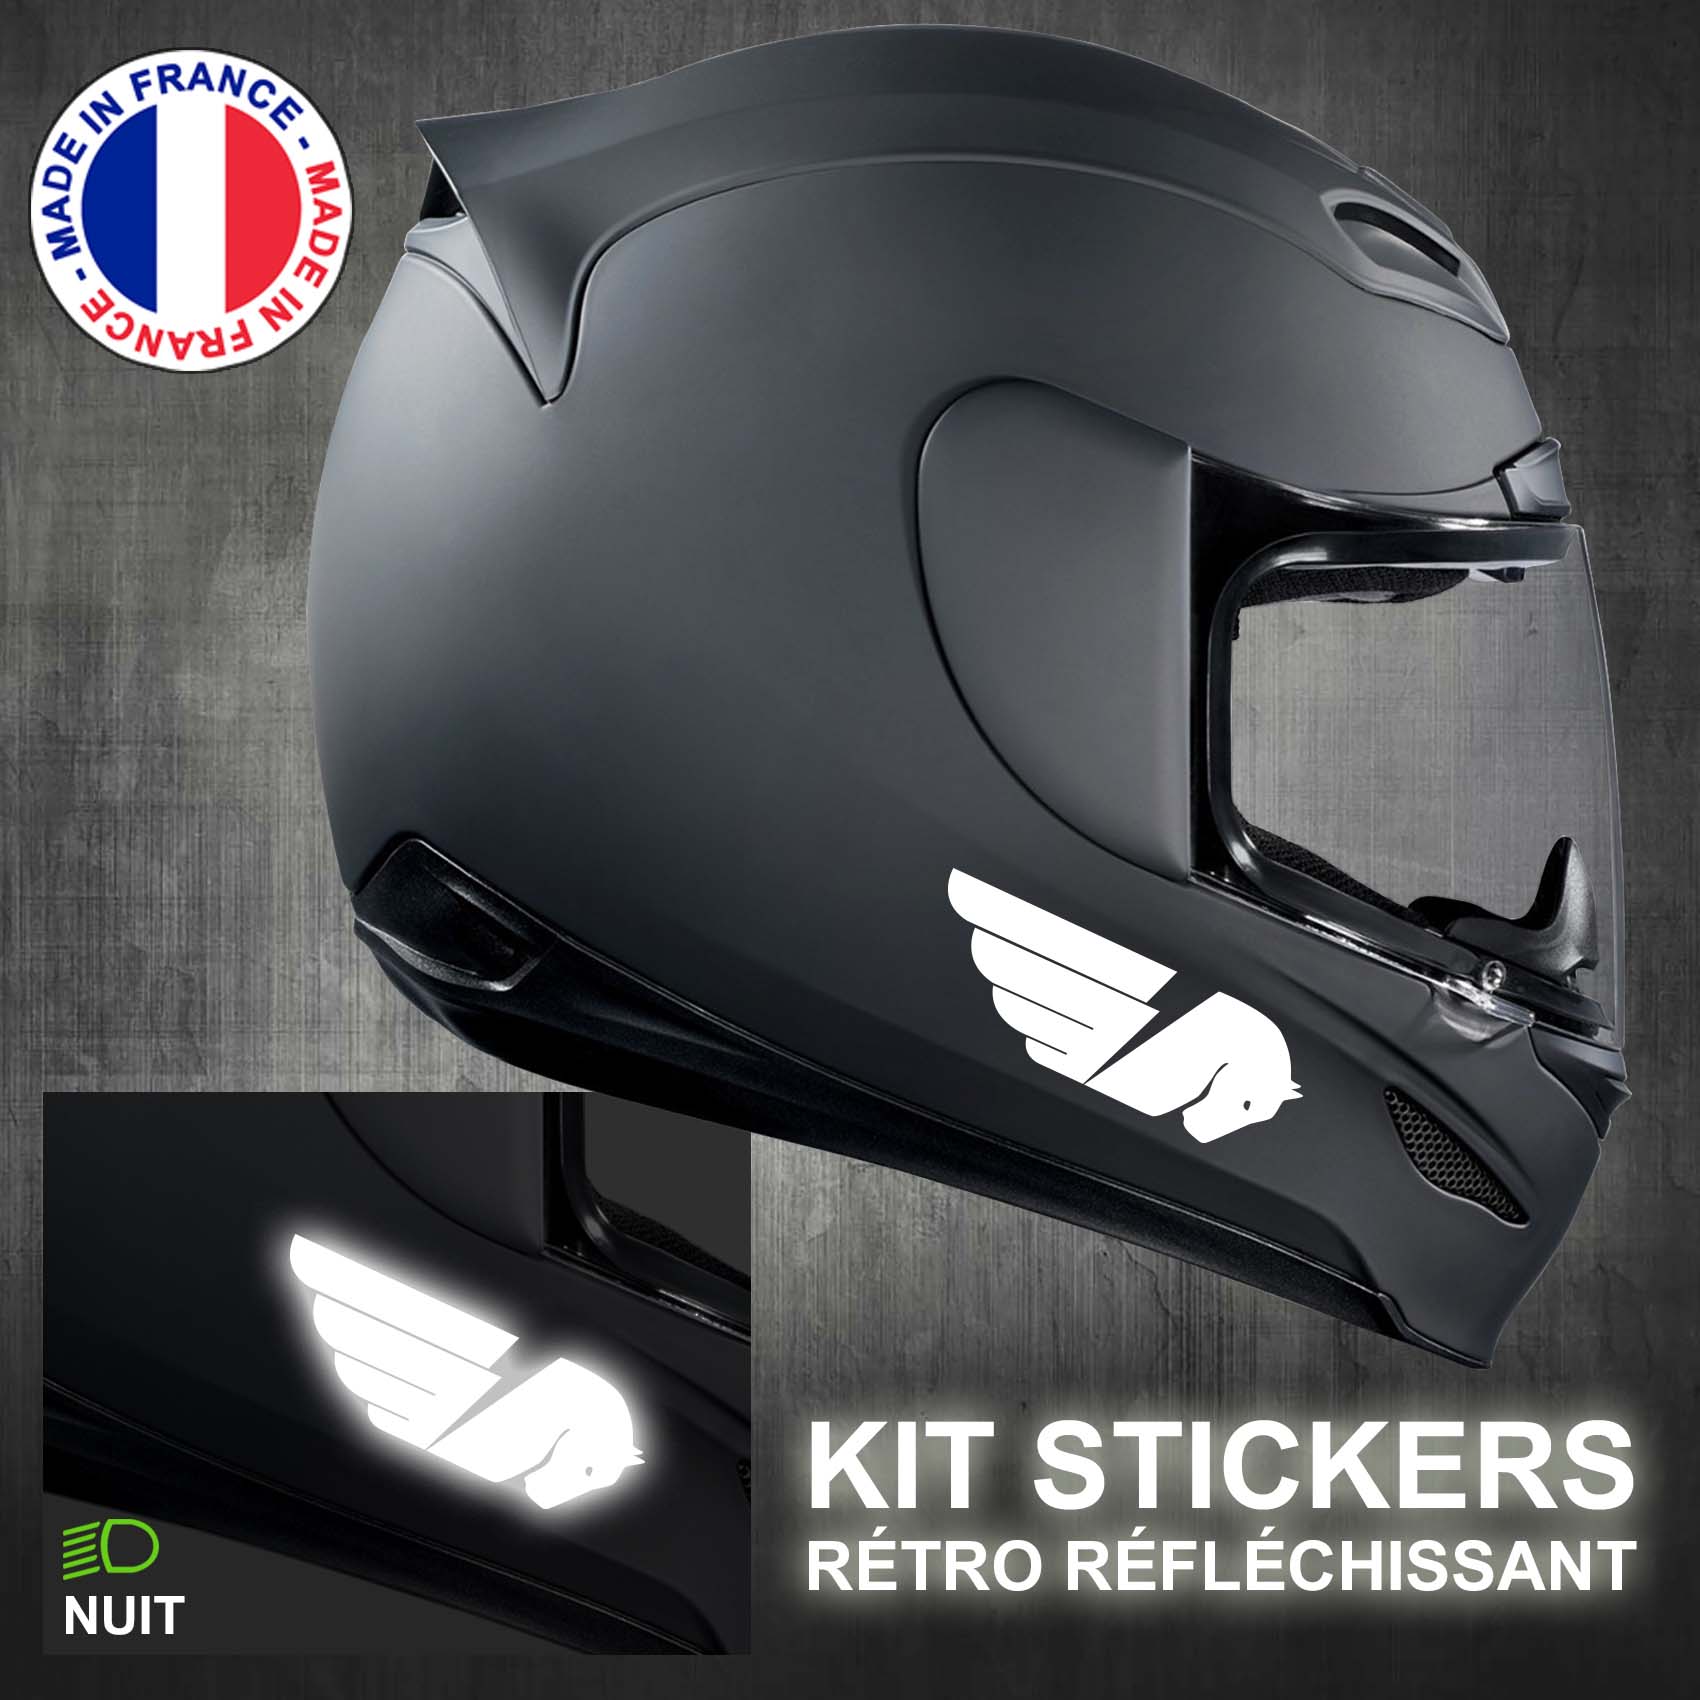 stickers-casques-buell-ref1-noir-retro-reflechissant-moto-velo-tuning-racing-route-sticker-adhesif-nuit-securite-decals-personnalise-personnalisable-autocollant-min